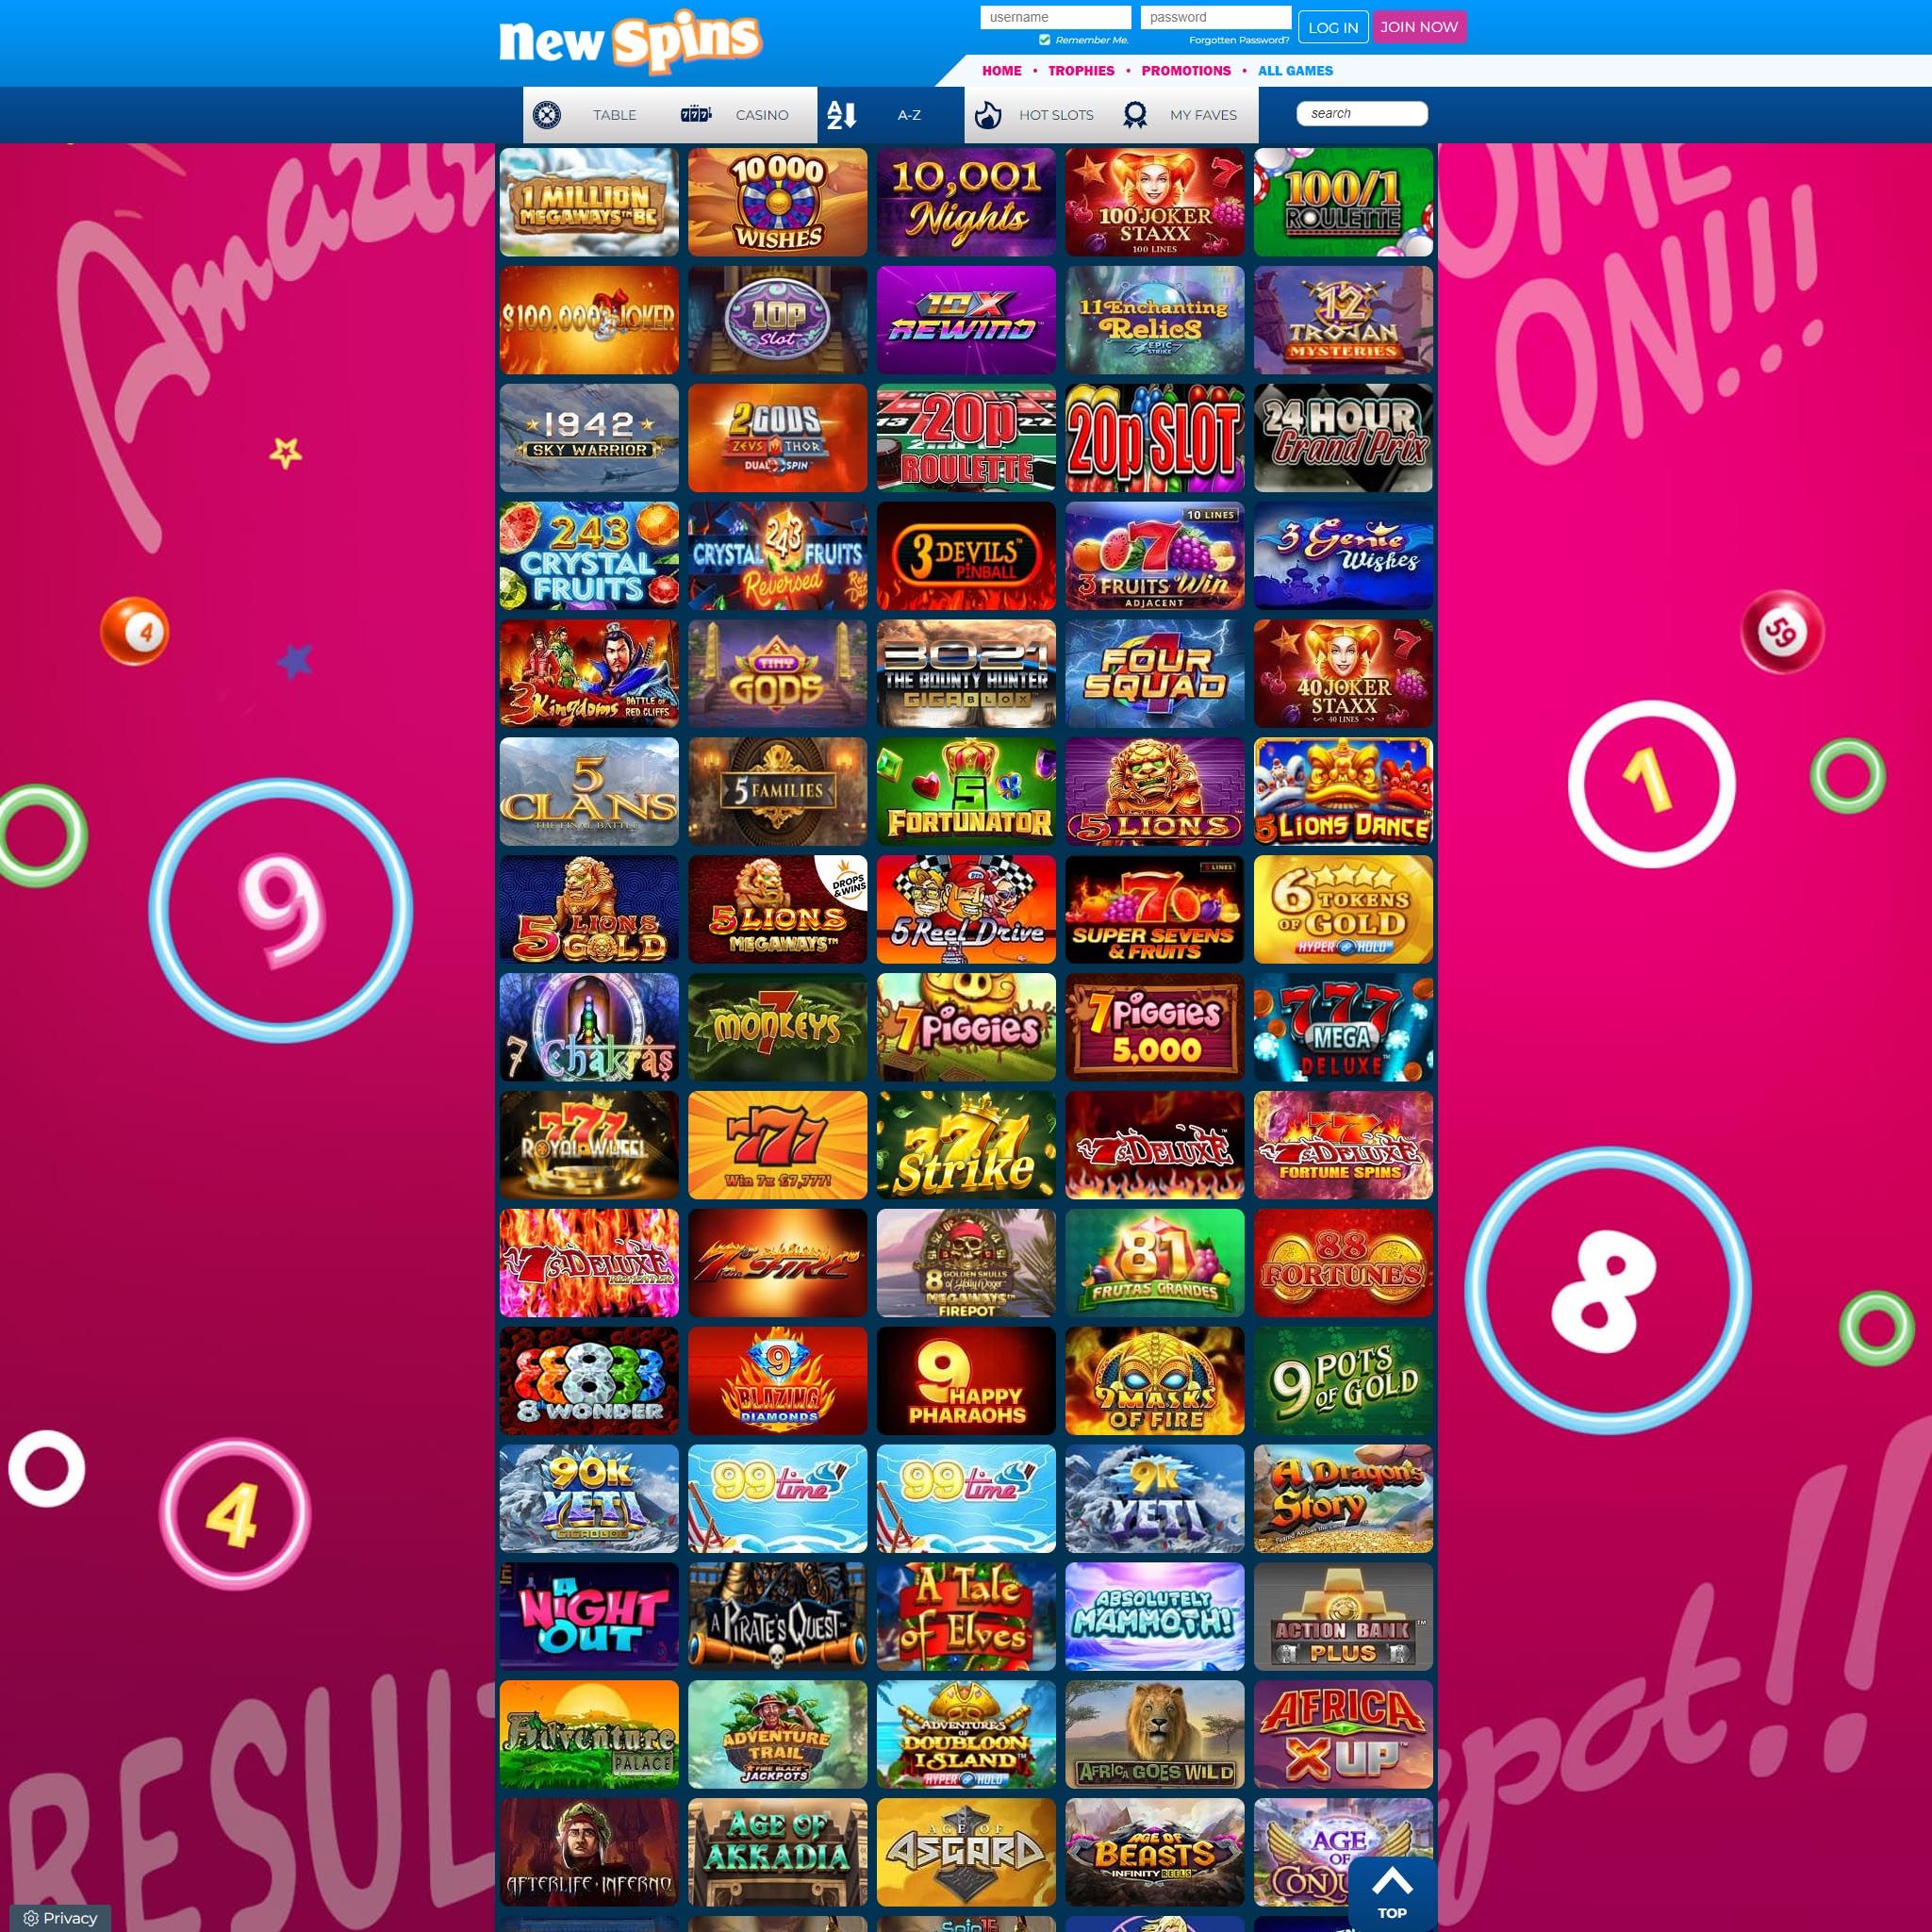 New Spins Casino full games catalogue